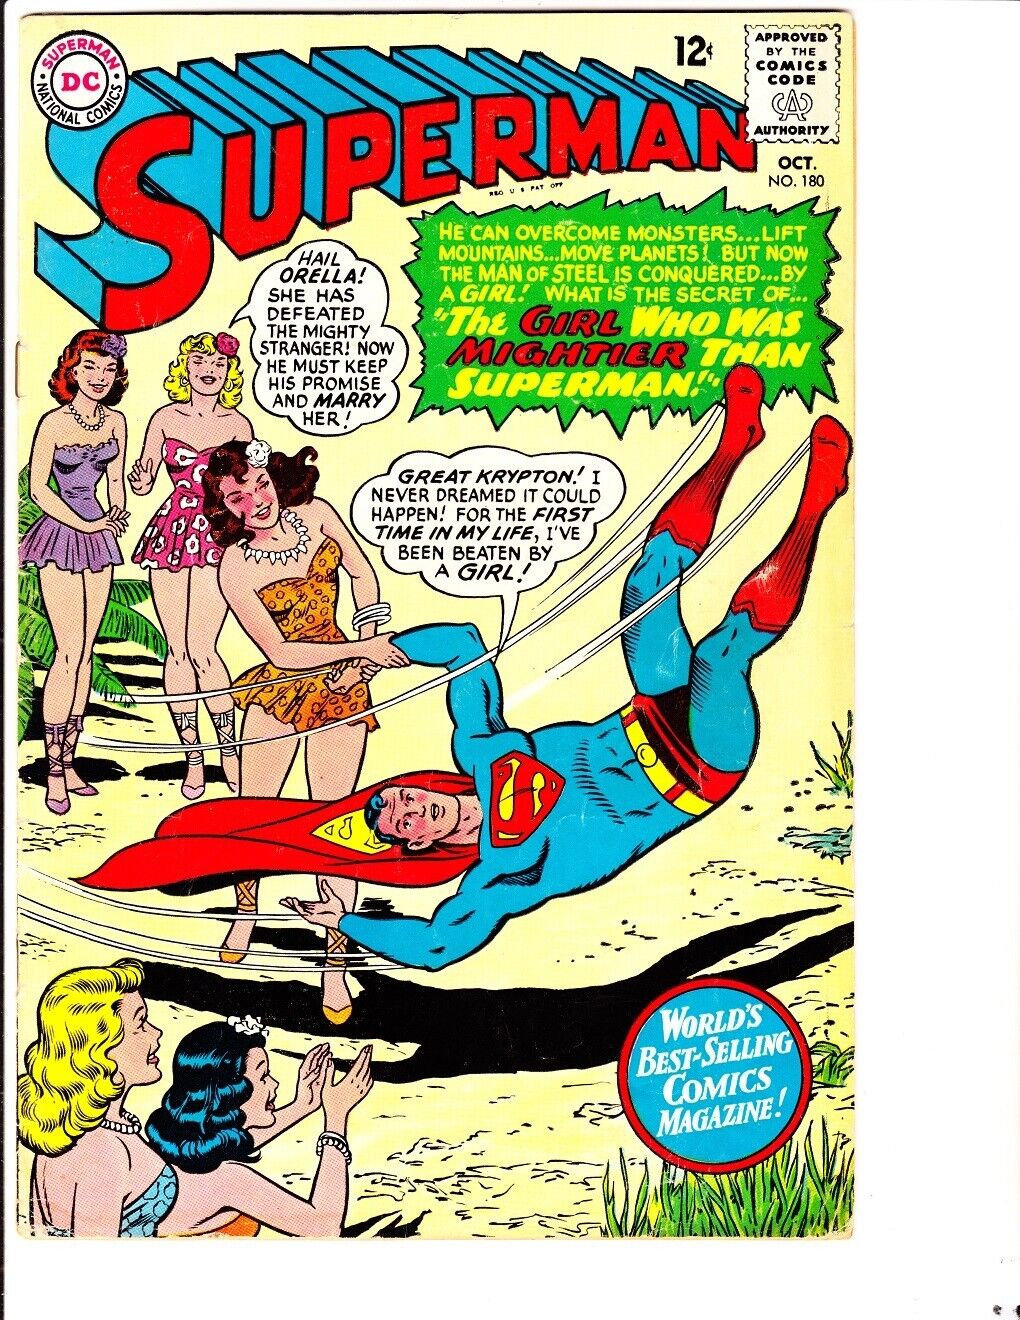 Superman 180 (1965): FREE to combine- in Good condition